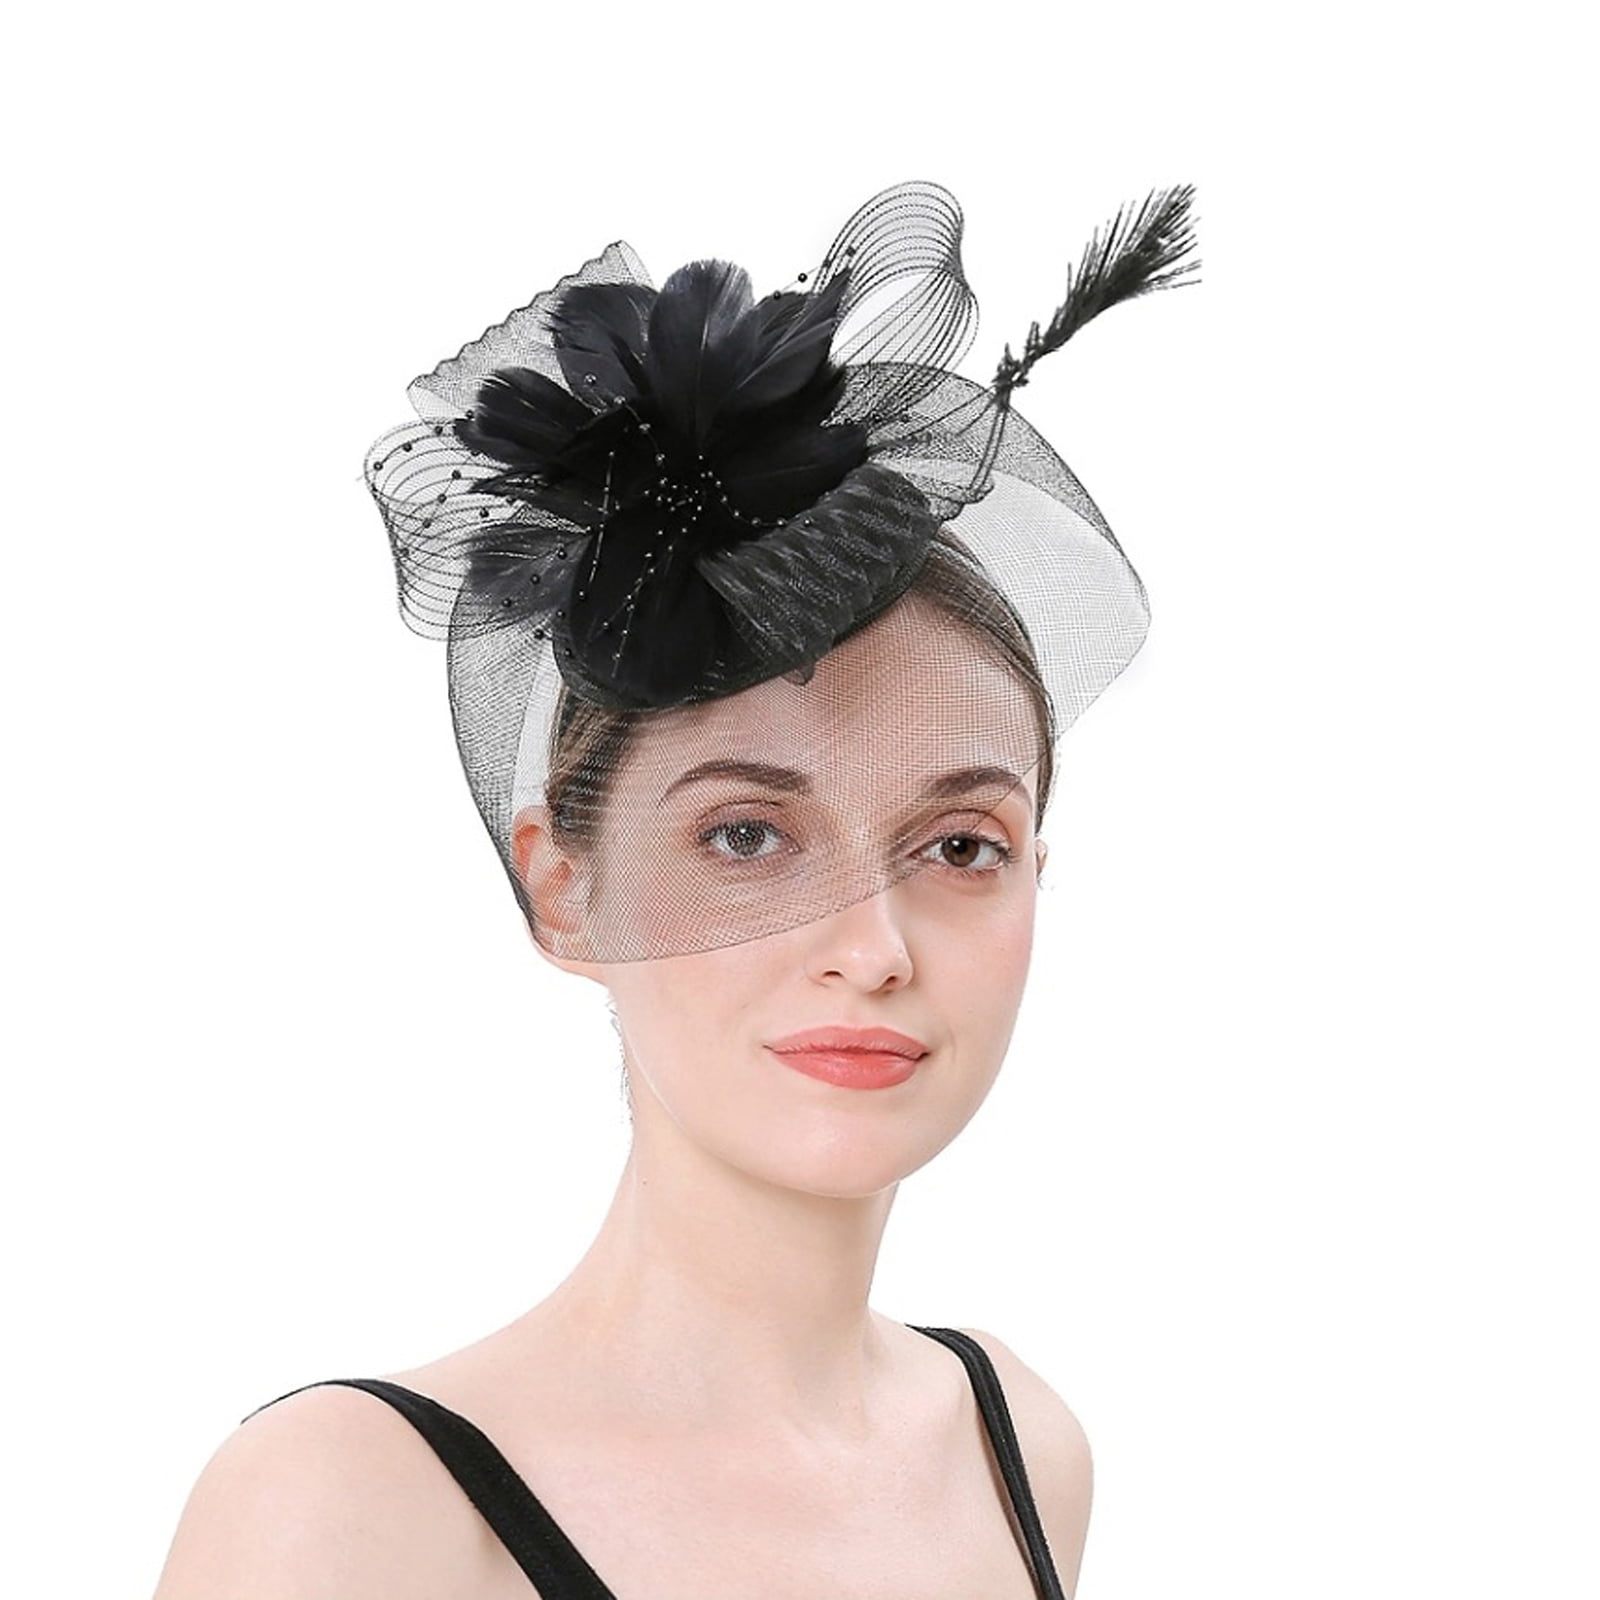 Fascinator Hats for Women Ladies Flower Mesh Feather Pillbox Hat with Veil Headband and a Clip Tea Party Headwear 